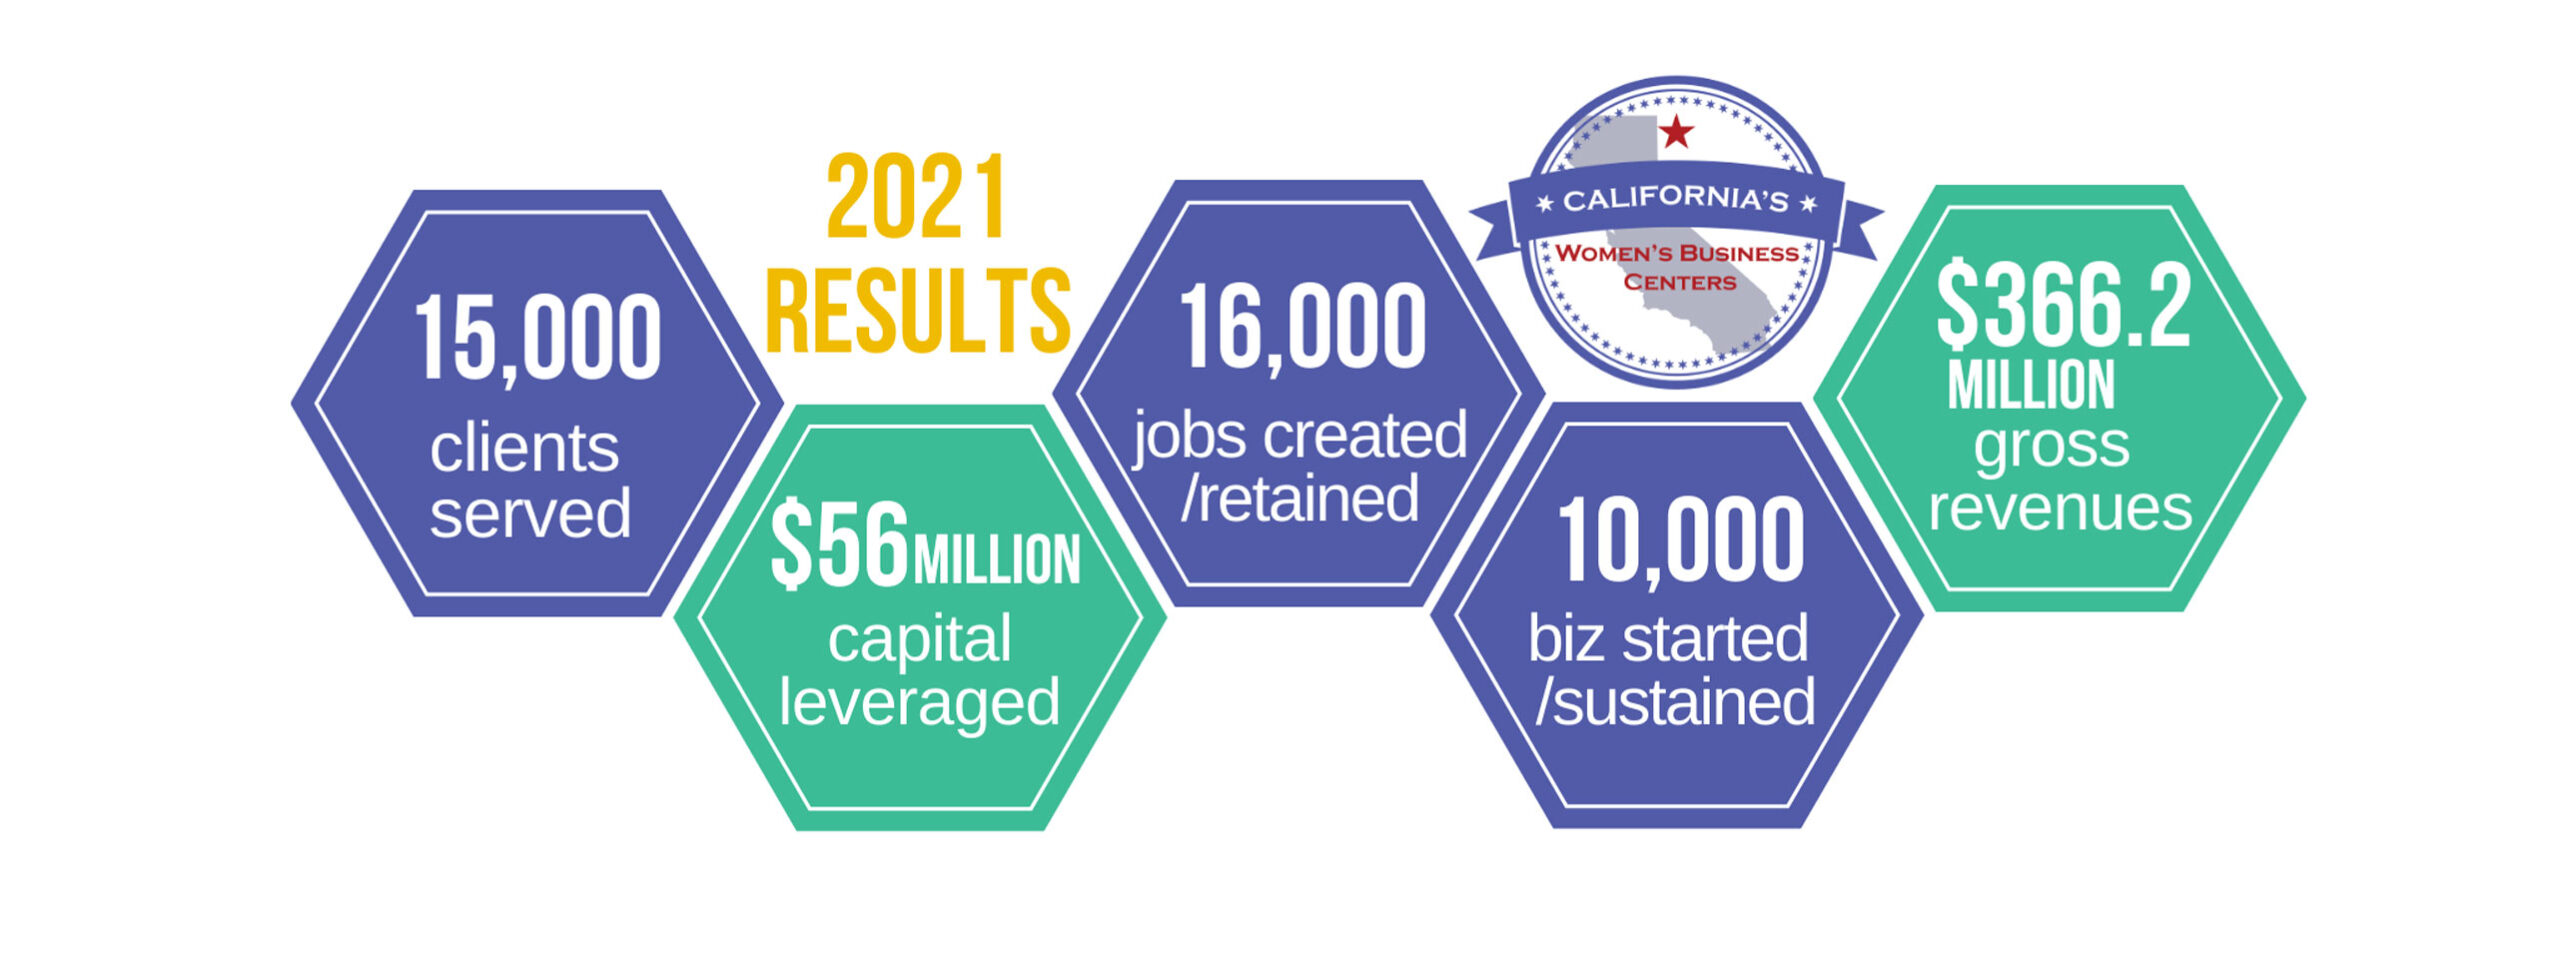 California WBC 2021 results when it comes to business success